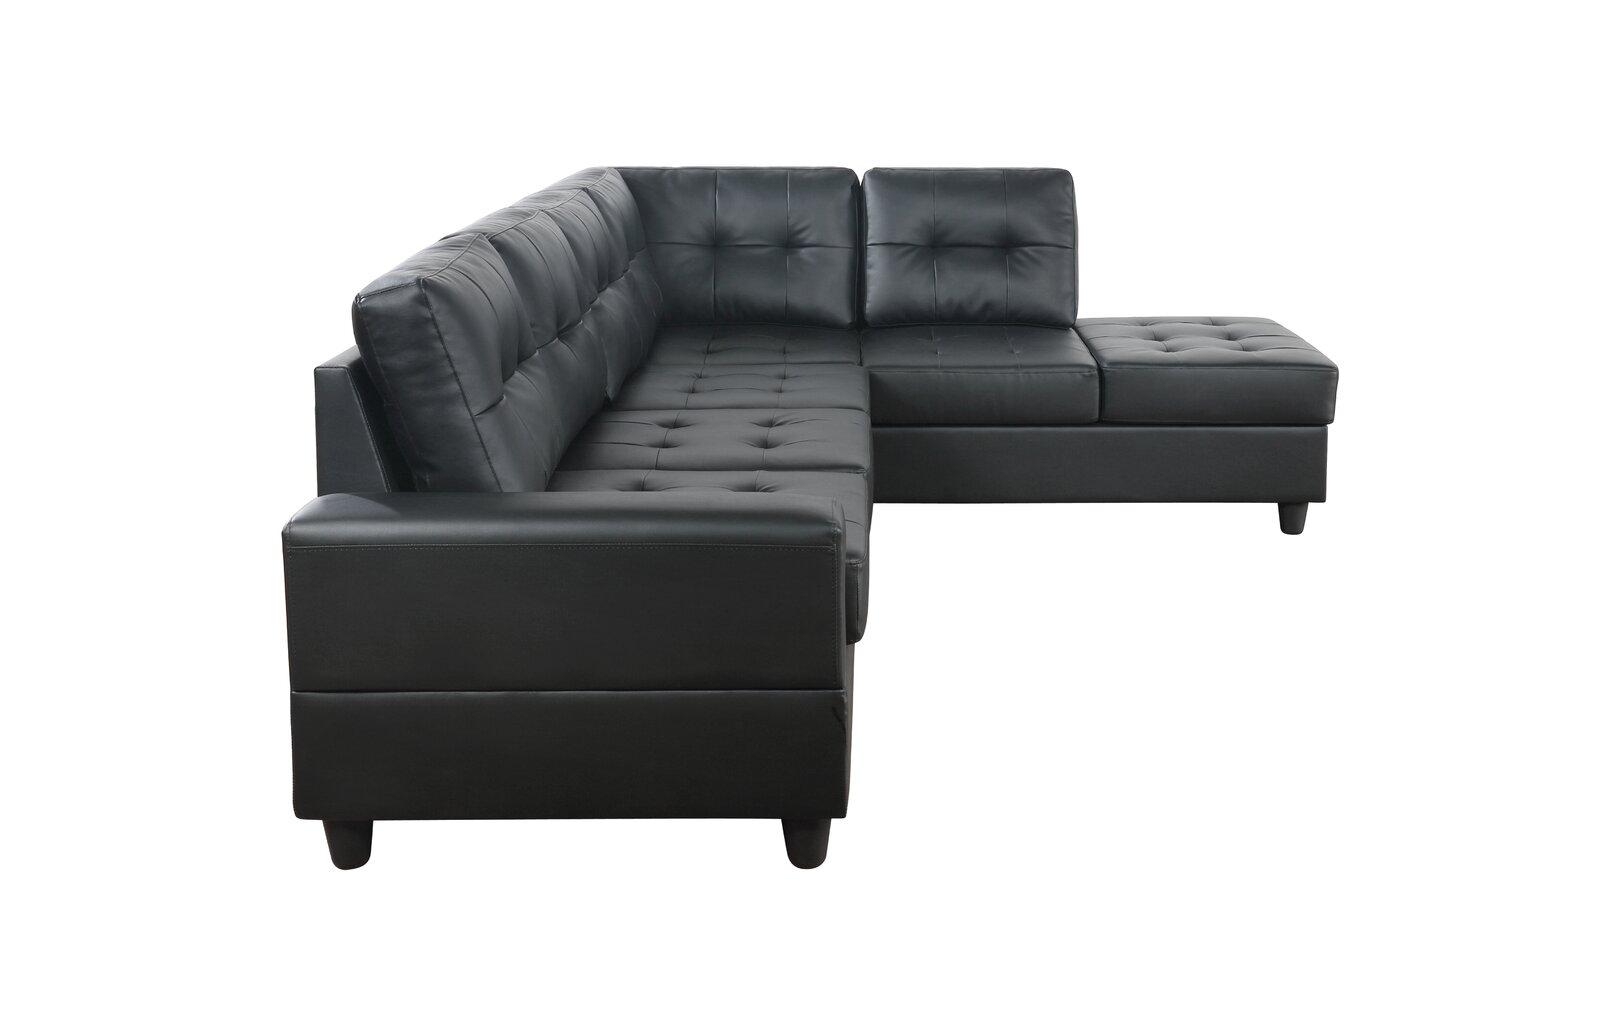 

    
Black Eco Leather Sectional Reversable Sofa BOSTON Galaxy Home Contemporary
